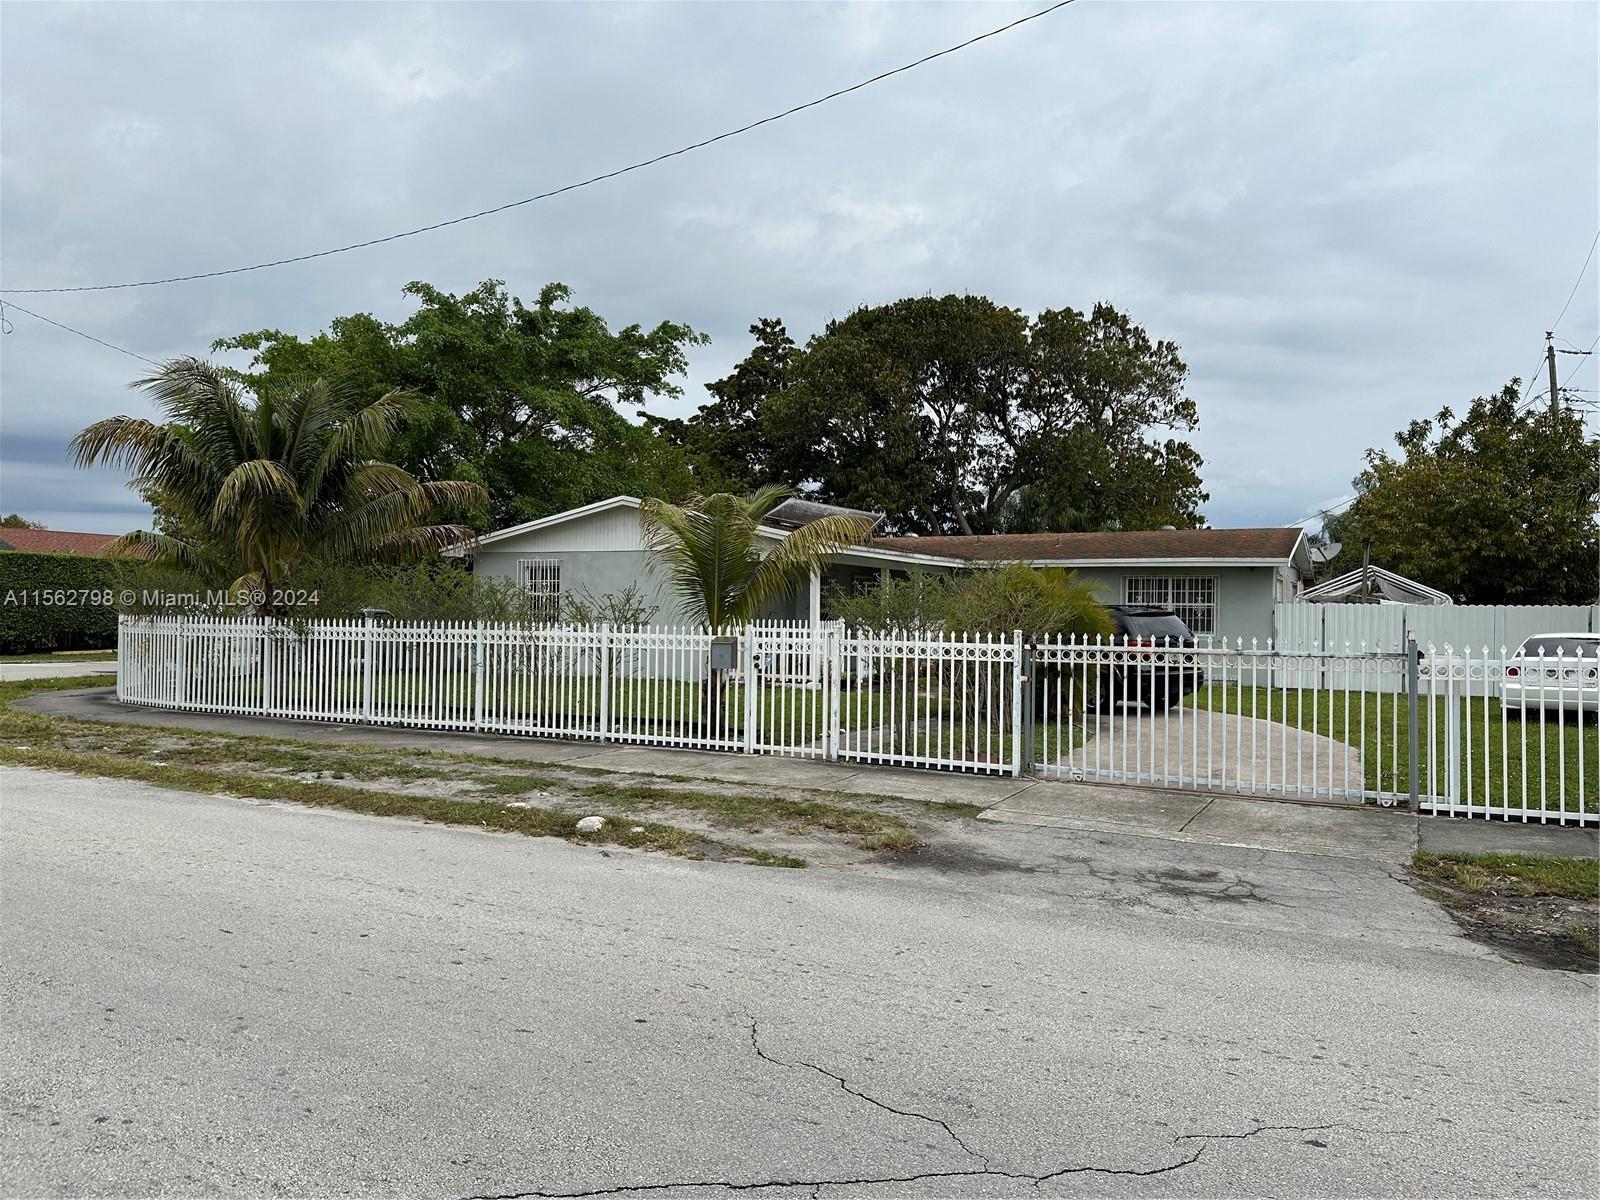 Photo of 4351 NW 185th St in Miami Gardens, FL